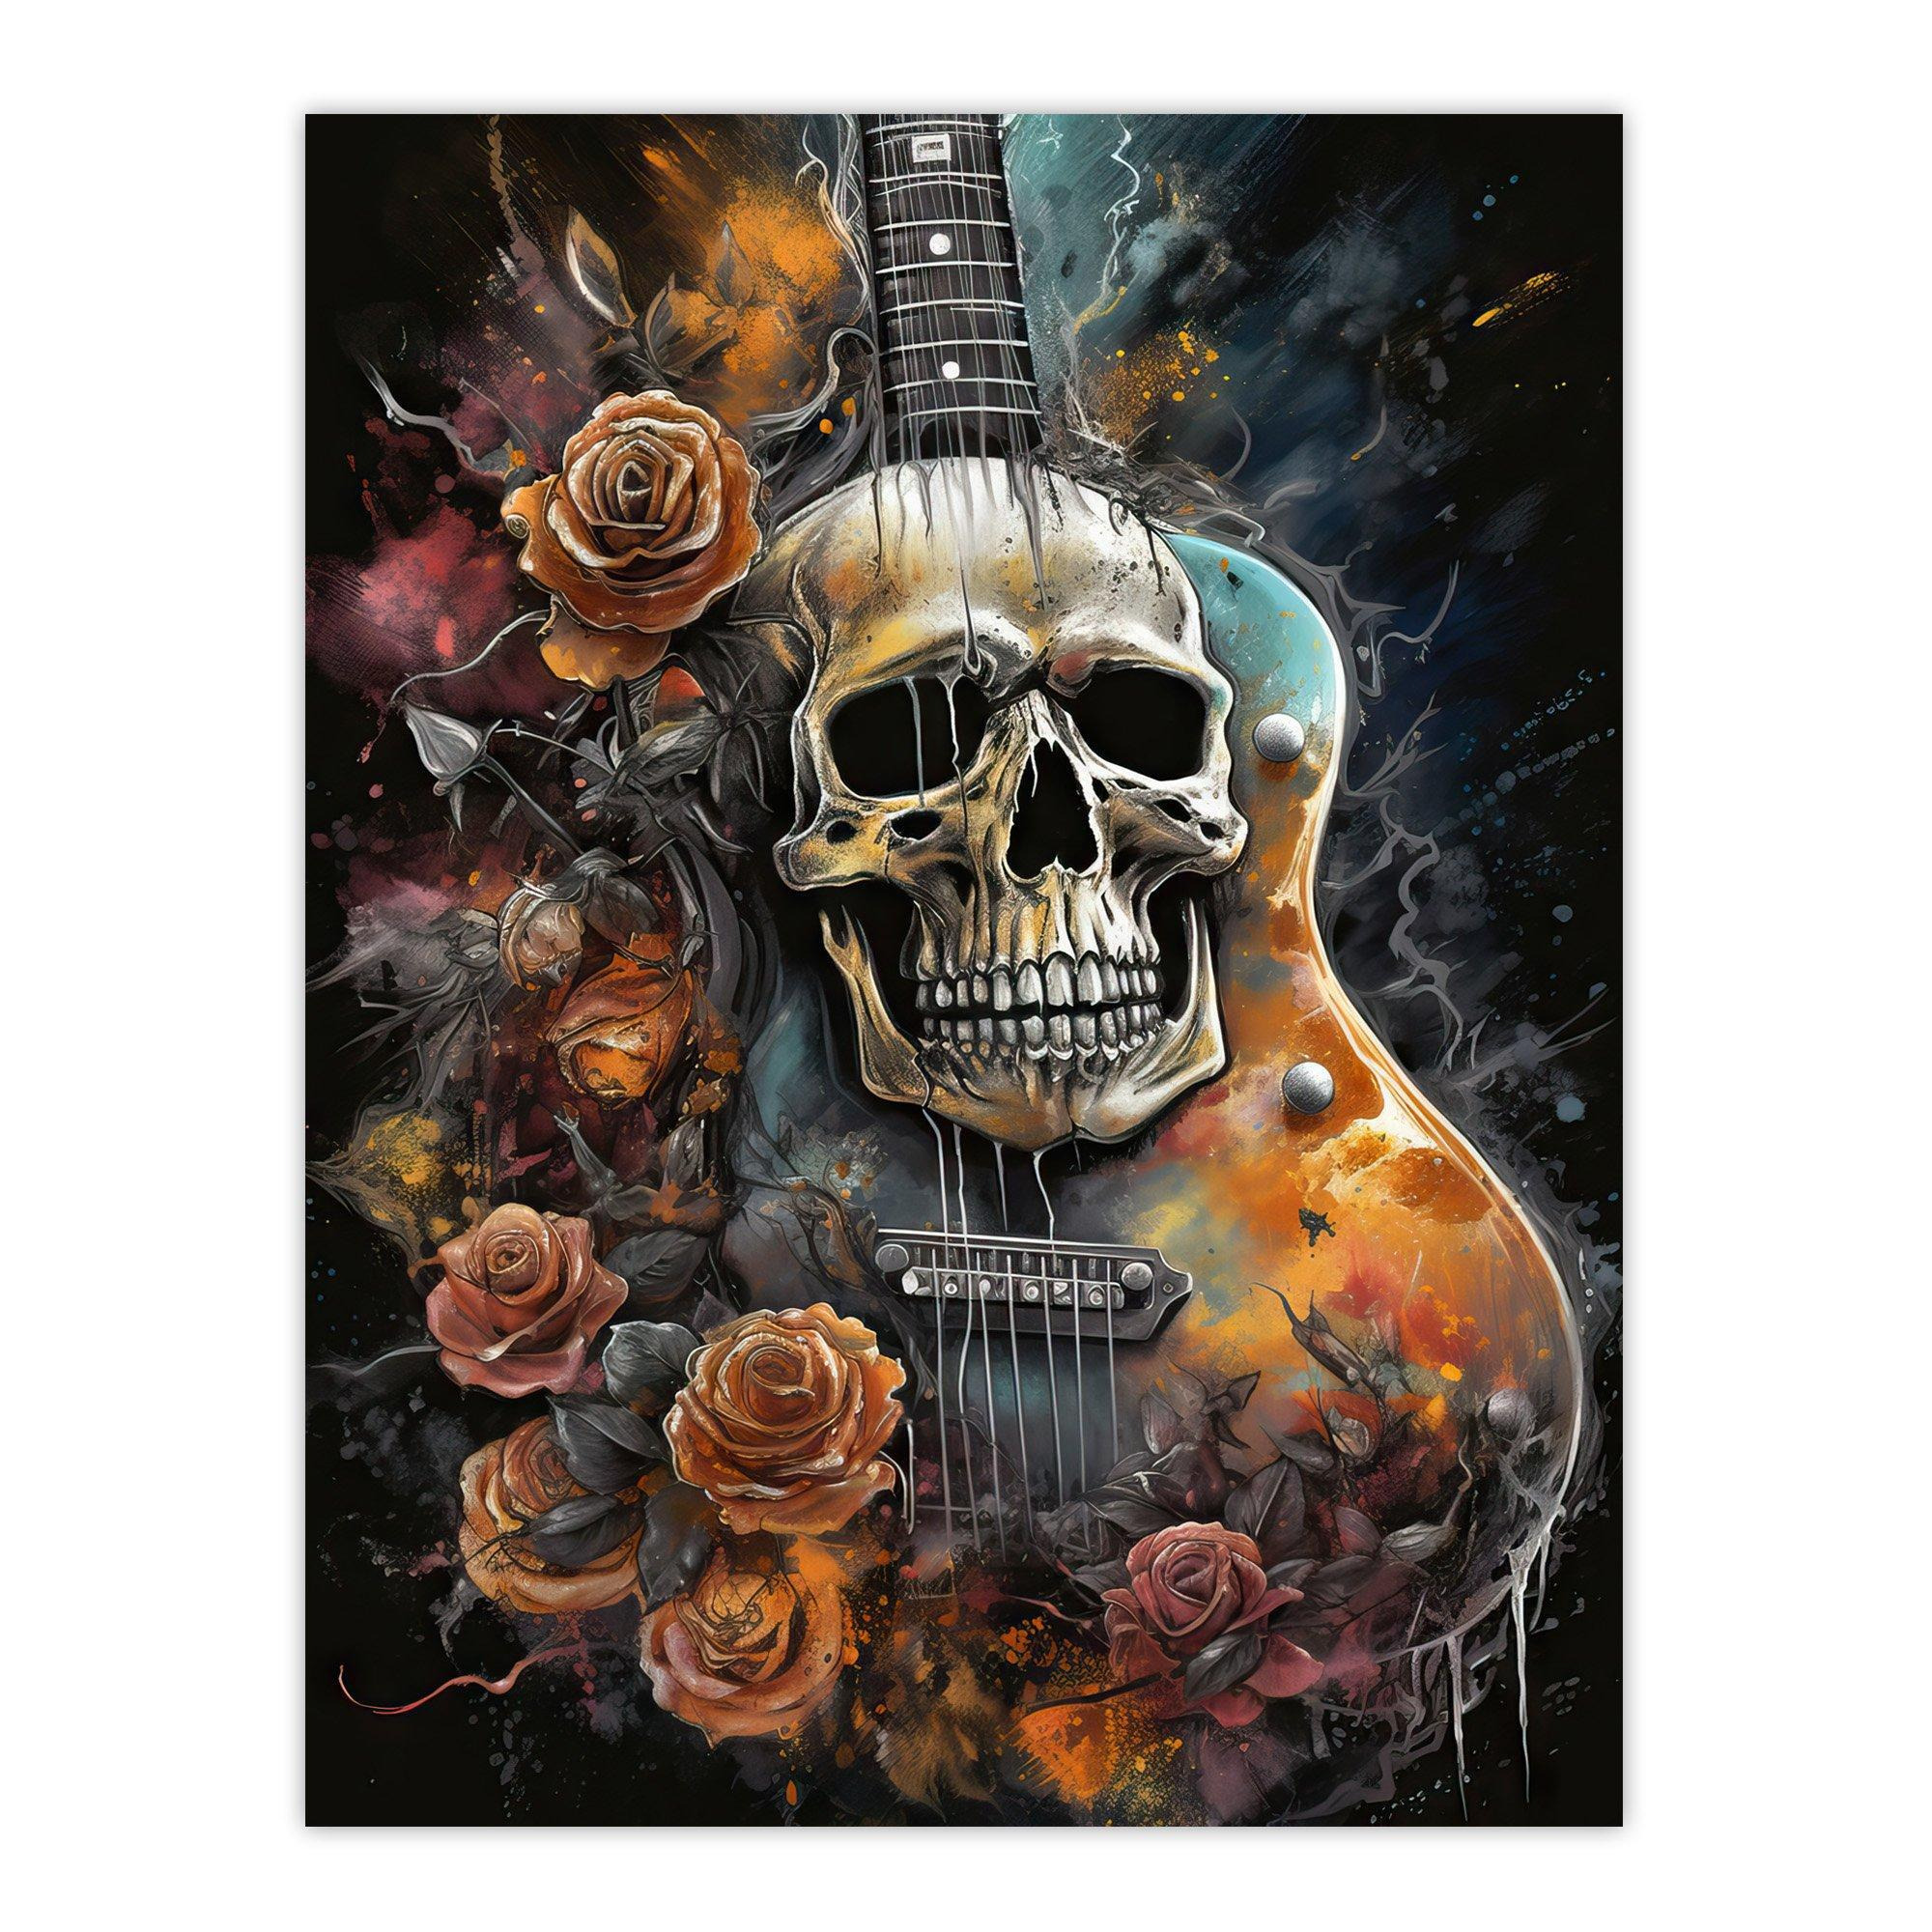 Guitar With Roses And Skull Conceptual Painting Electric Floral Melodic Metal Unframed Wall Art Print Poster Home Decor Premium - image 1